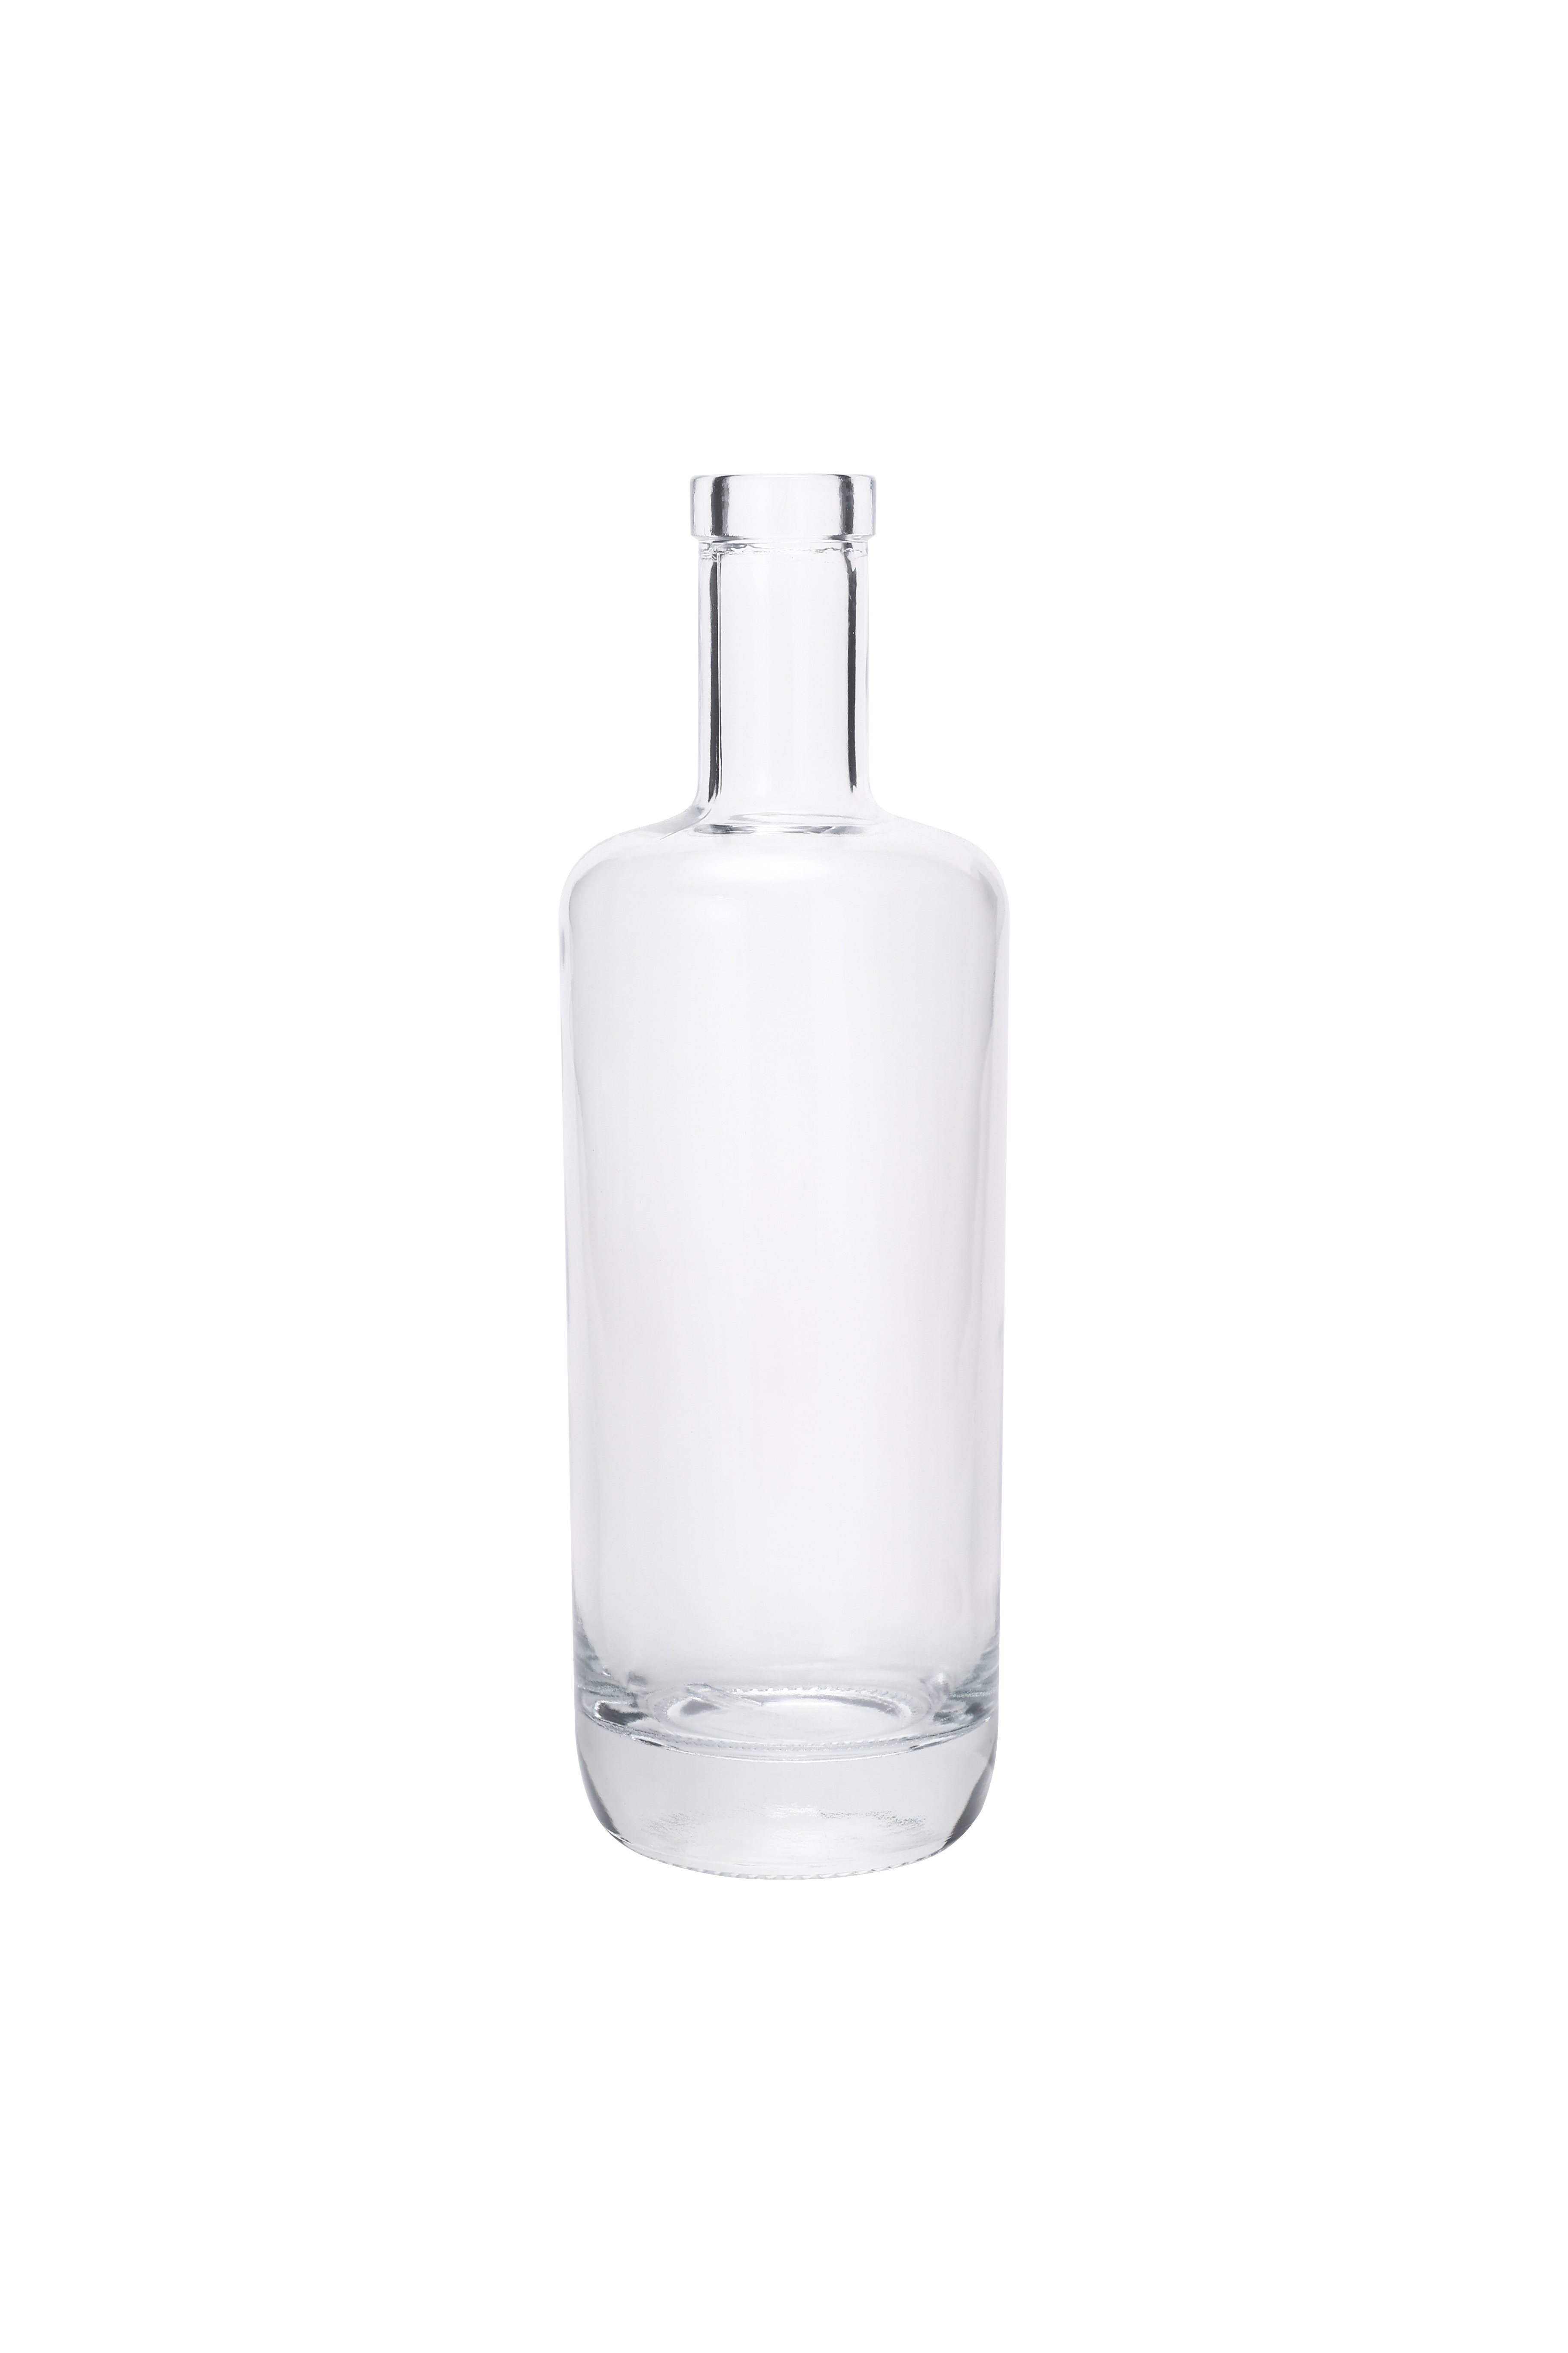 Vodka Glass Bottle Gin with Screw Cork Mouth